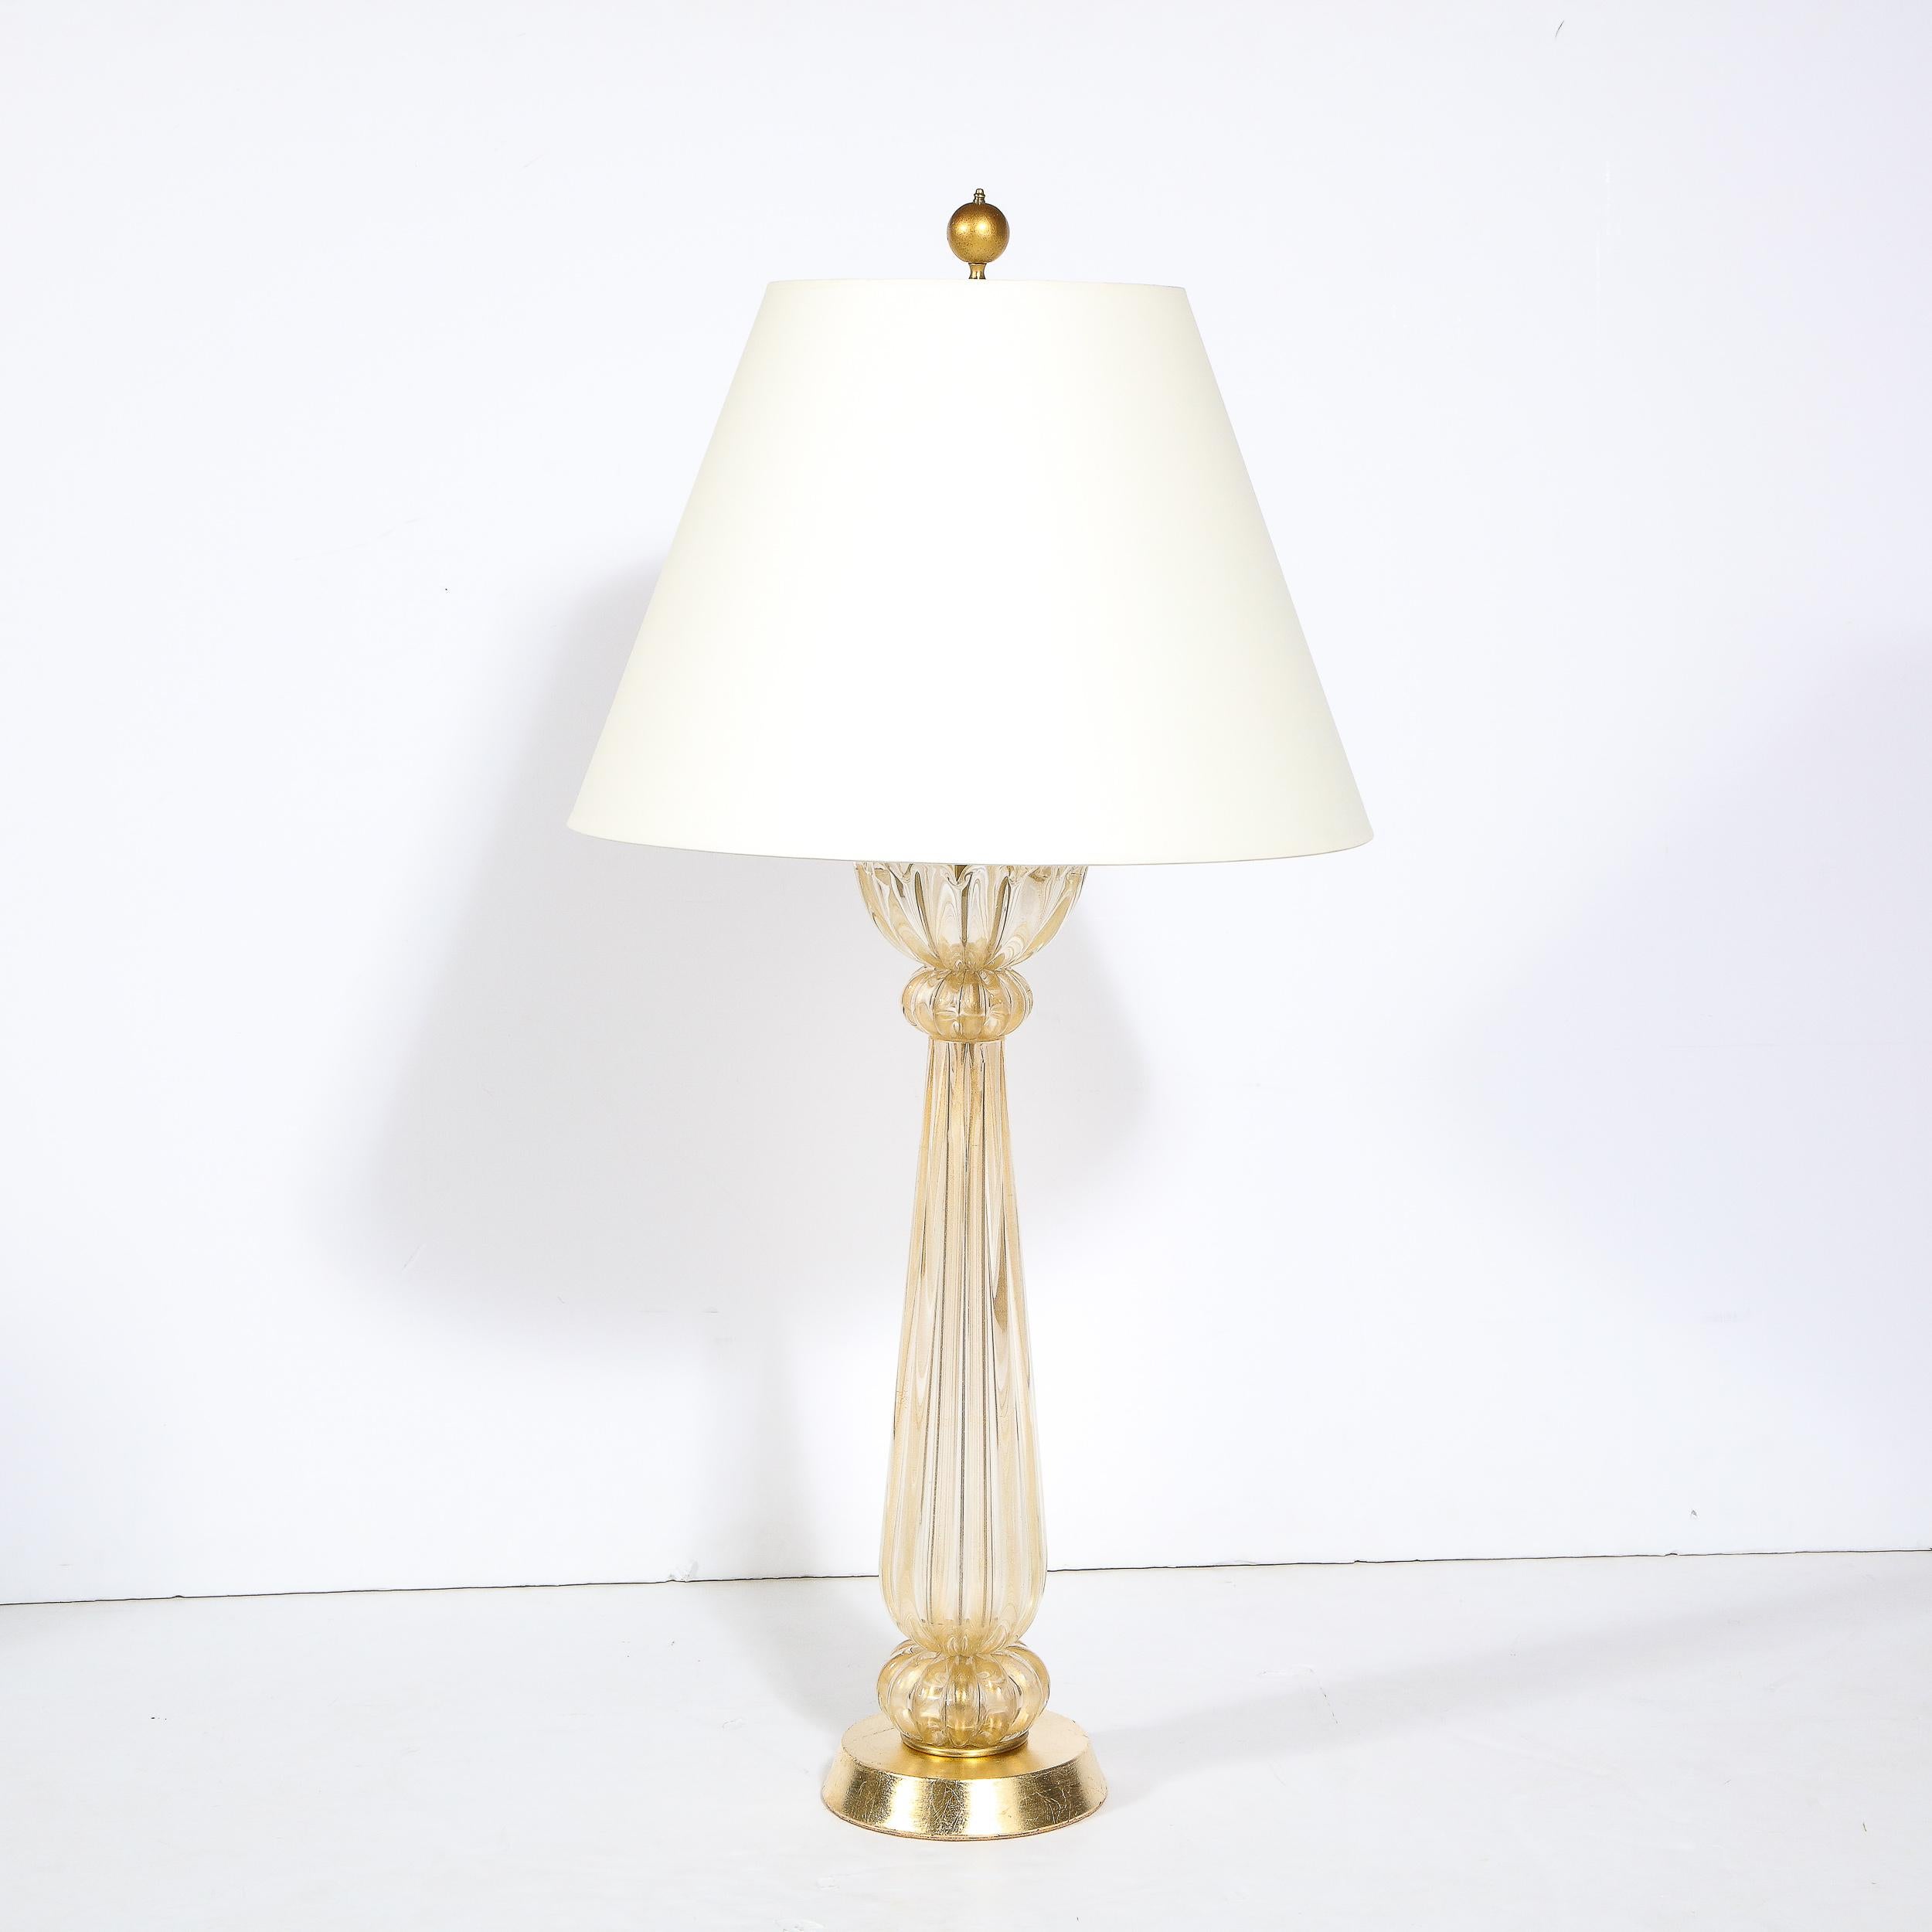 This table lamp is a stunning example of subdued glamor, realized in Murano Italy off the coast of Venice the piece is undeniably decadent and imbued with the highest quality craftsmanship. 24K Gold flecks are dispersed throughout the transparent